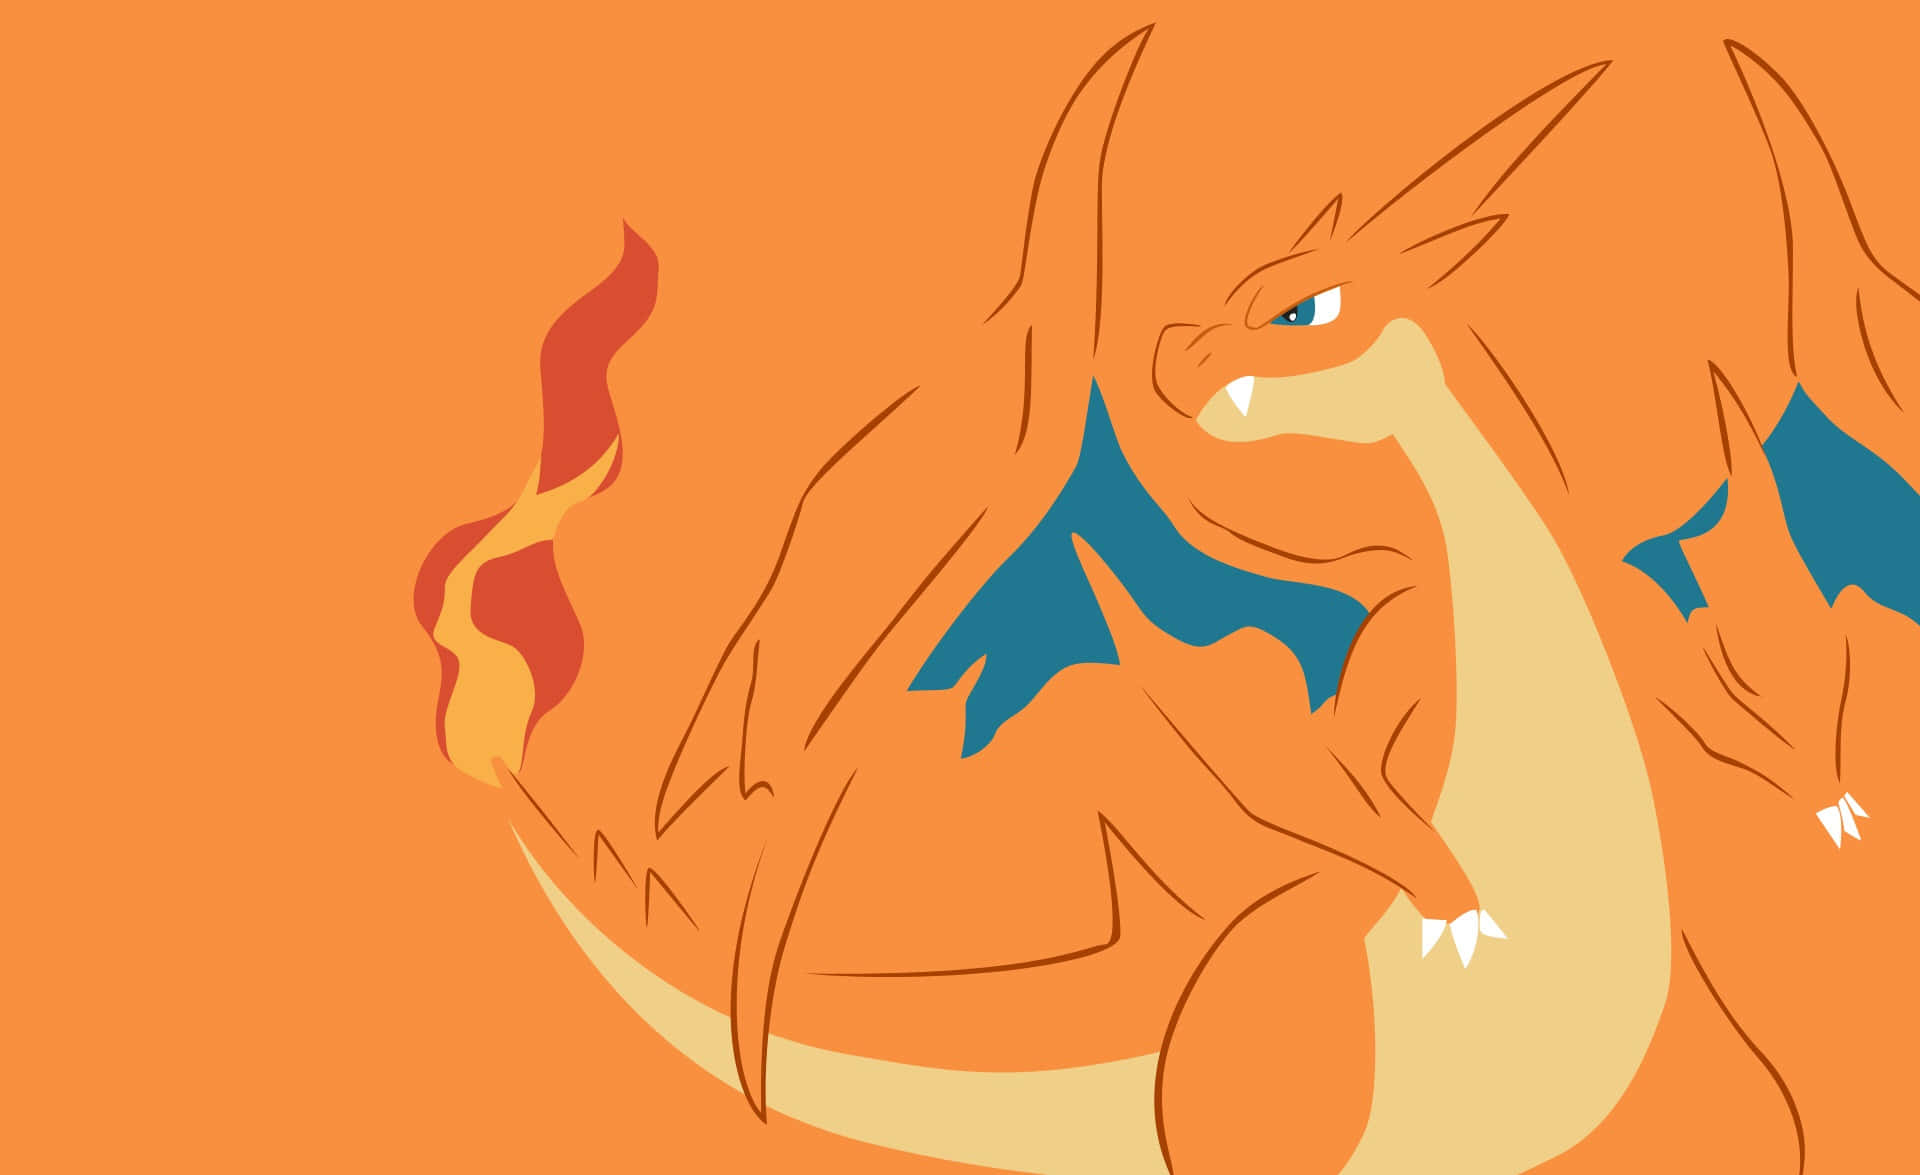 Charizard in action, showcasing its powerful fire-breathing ability